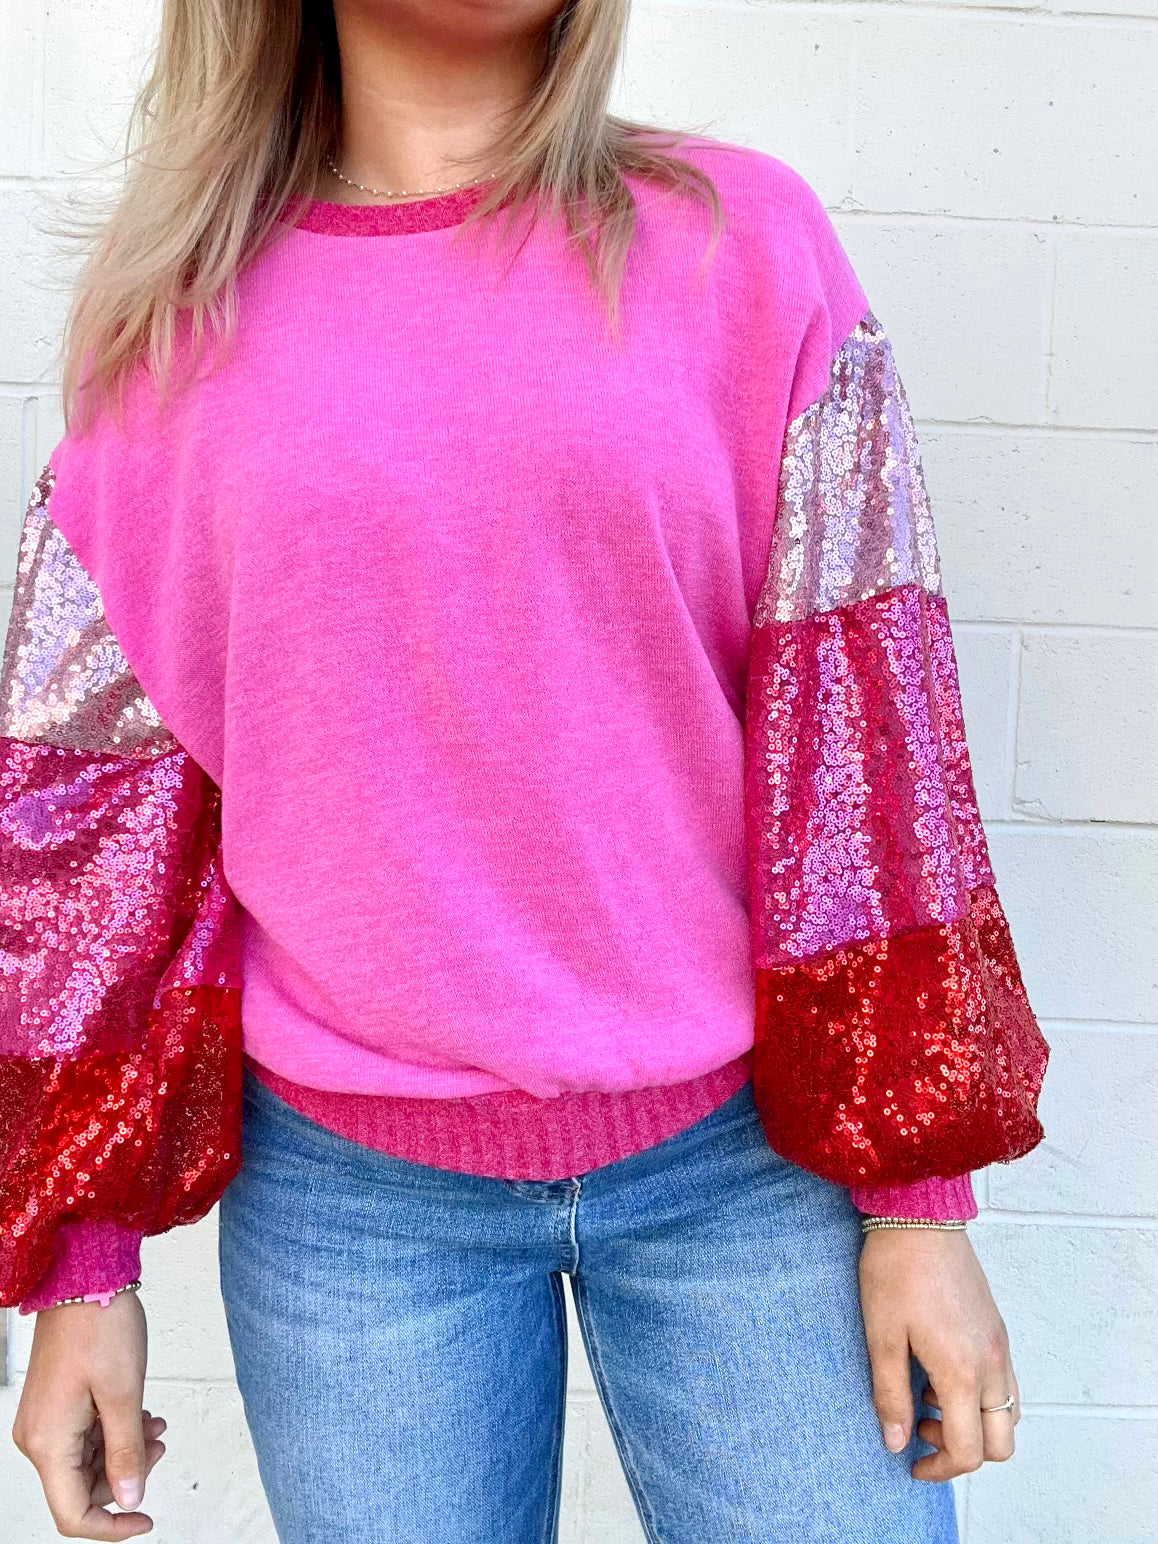 Red Hot & Pretty in Pink Vibes Sequin Top